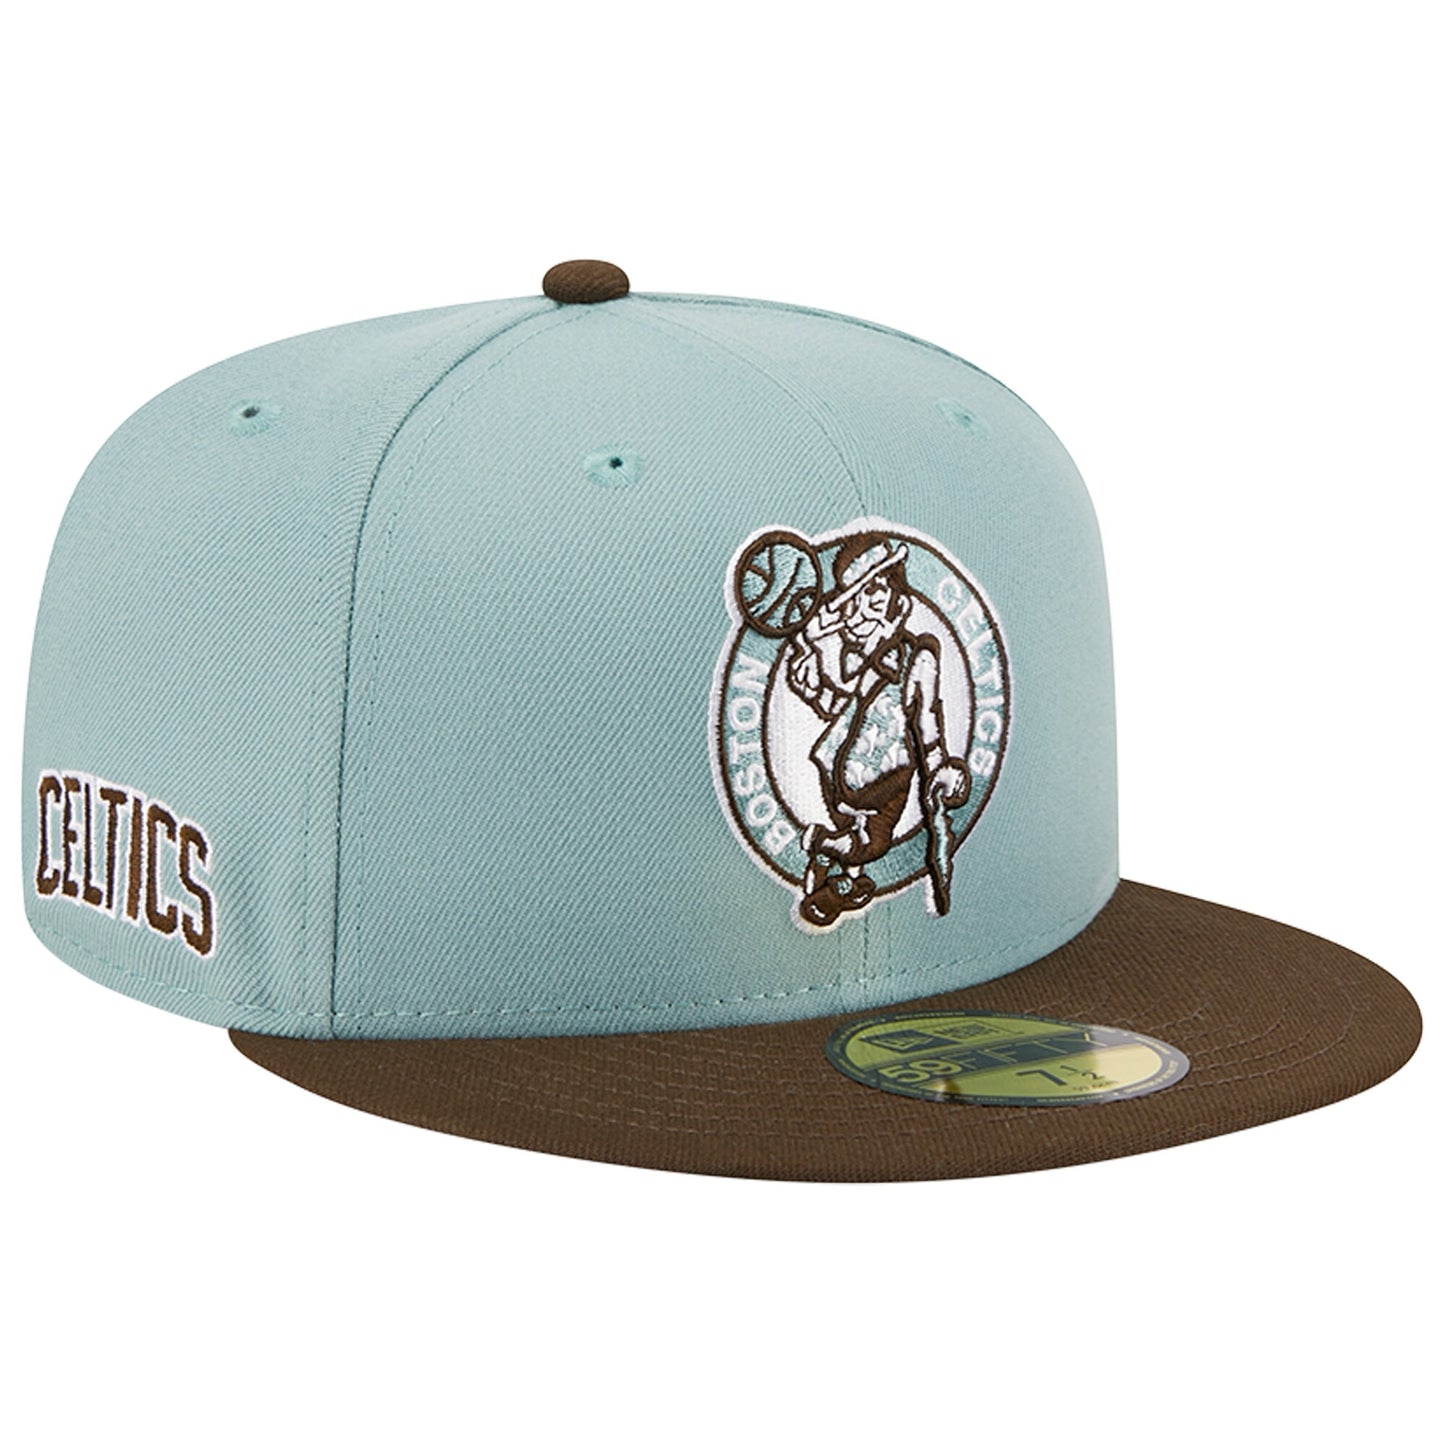 Boston Celtics New Era Two-Tone 59FIFTY Fitted Hat - Light Blue/Brown